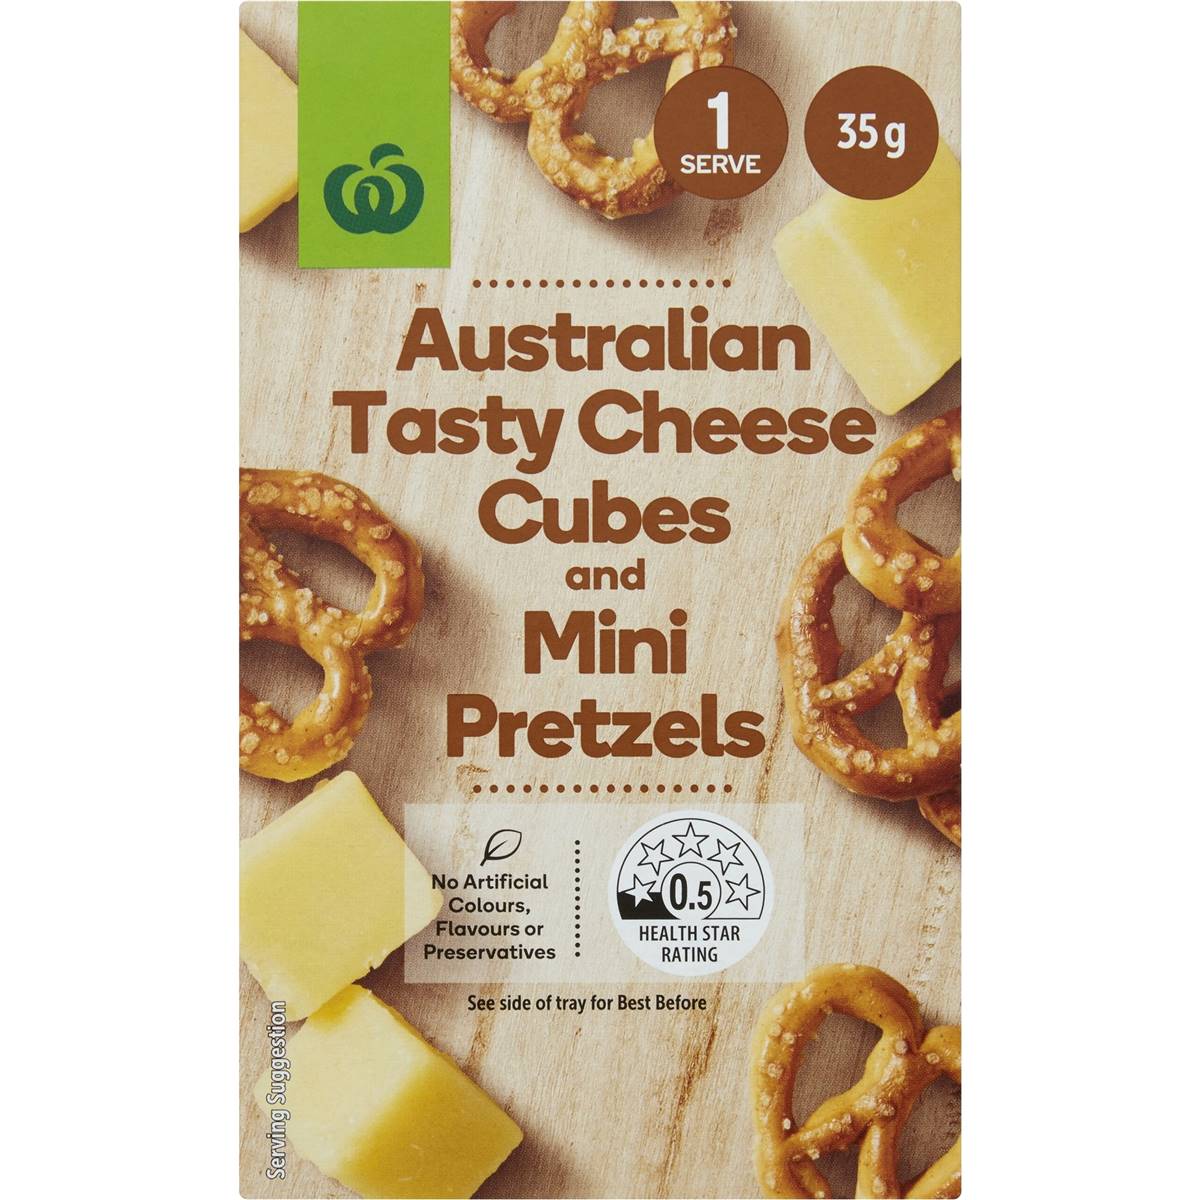 Calories in Woolworths Tasty Cheese Cubes & Mini Pretzels